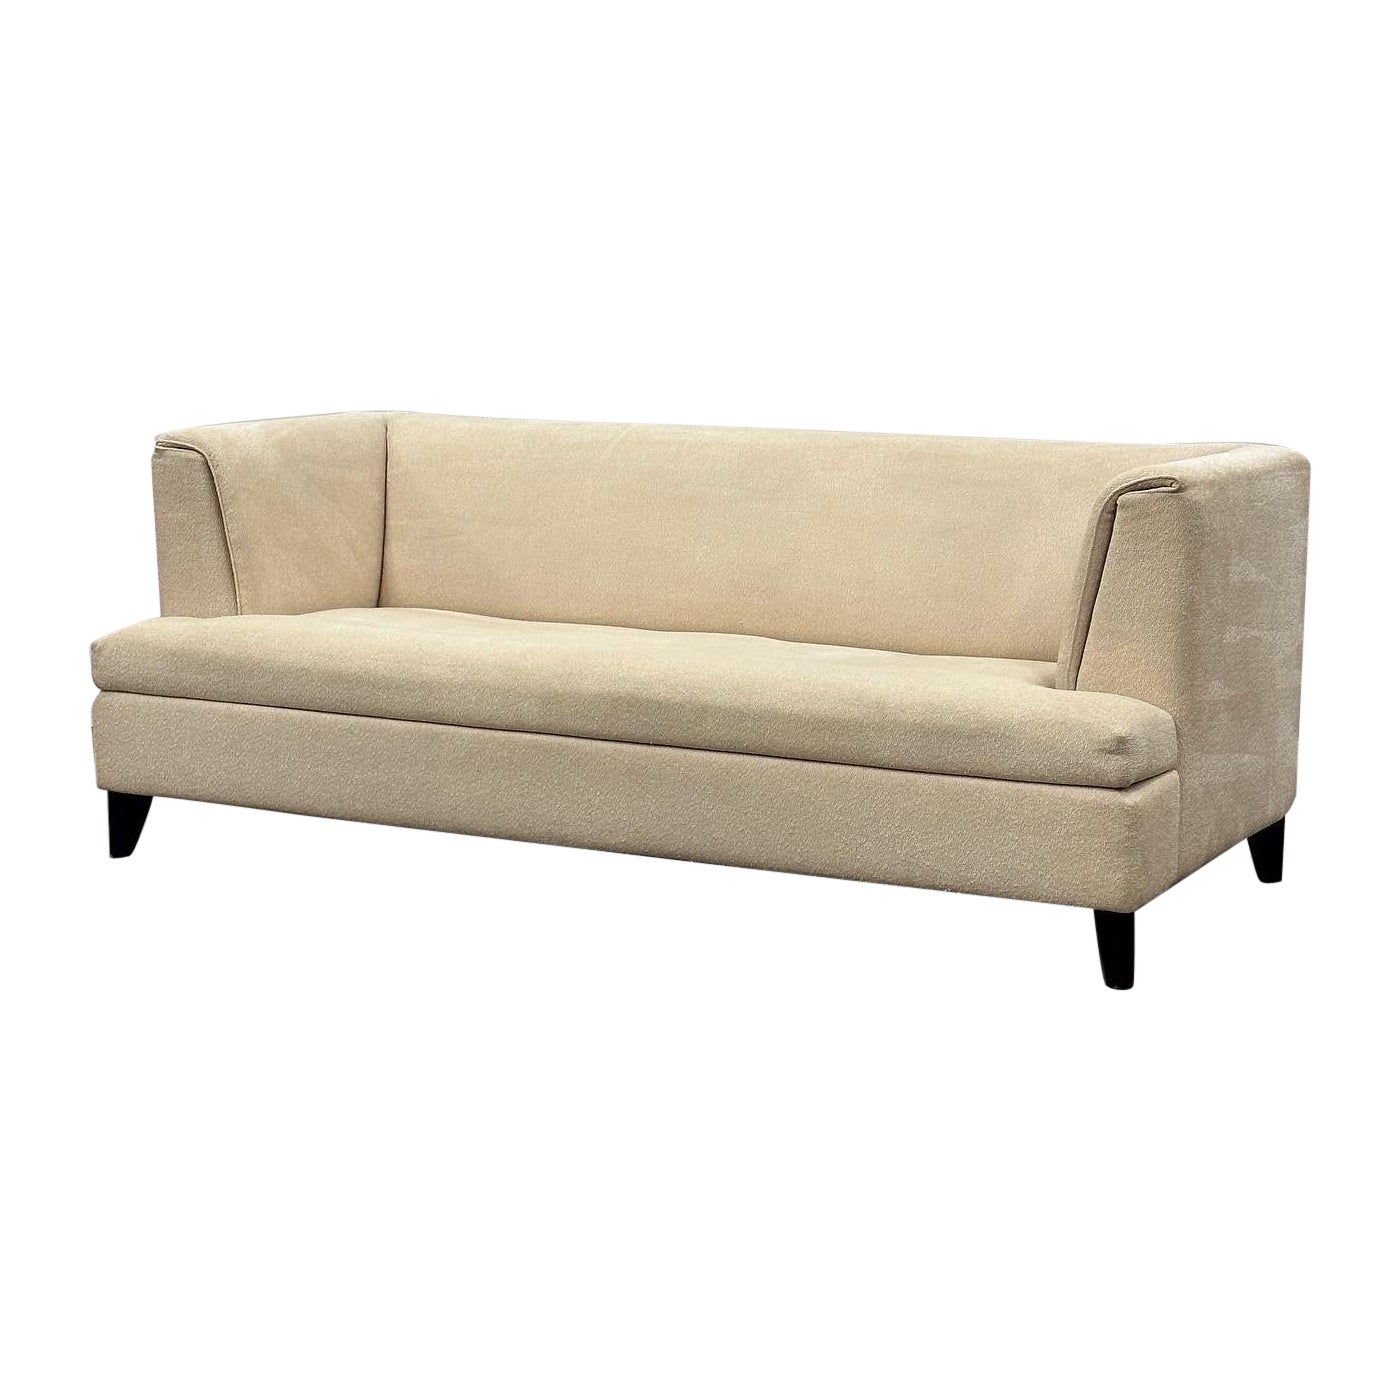 Havanna Sofa by Paolo Piva for Wittmann